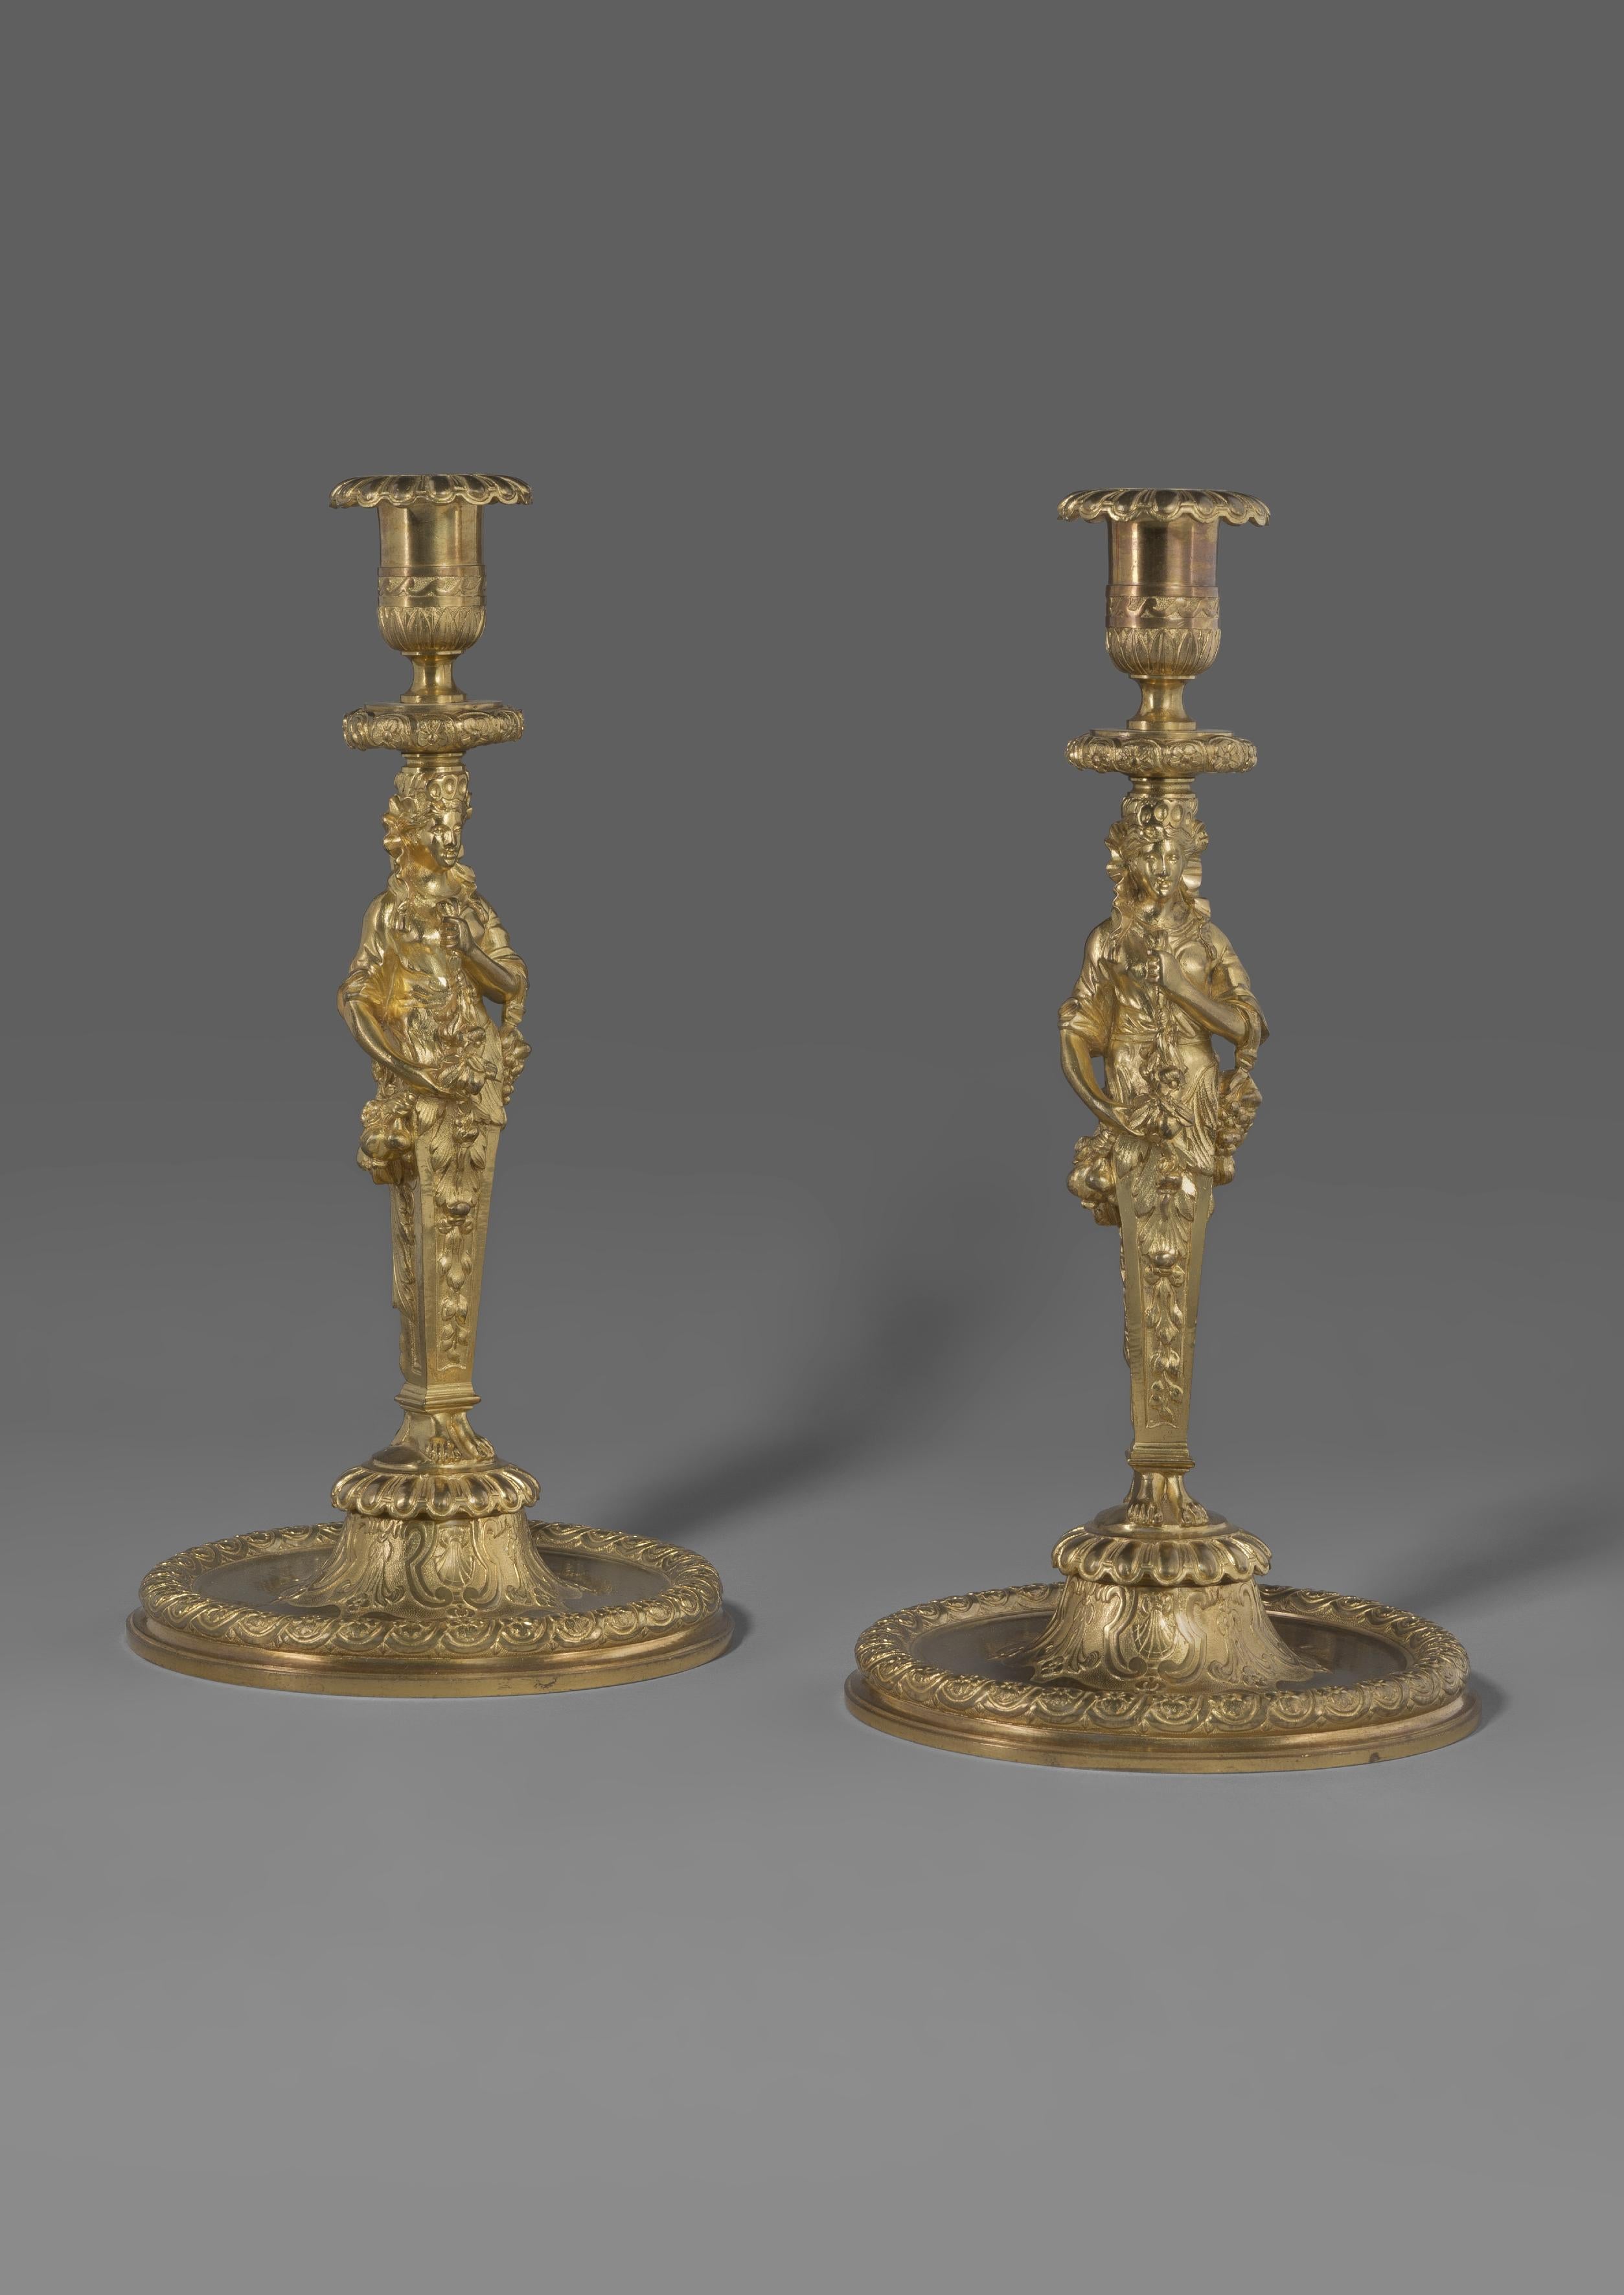 A fine pair of Louis XIV style gilt bronze figural candlesticks.

French, circa 1860. 

A fine pair of Louis XIV style gilt bronze figural candlesticks, with stems cast as female terms holding floral swags and pendants of flowers and fruit. The